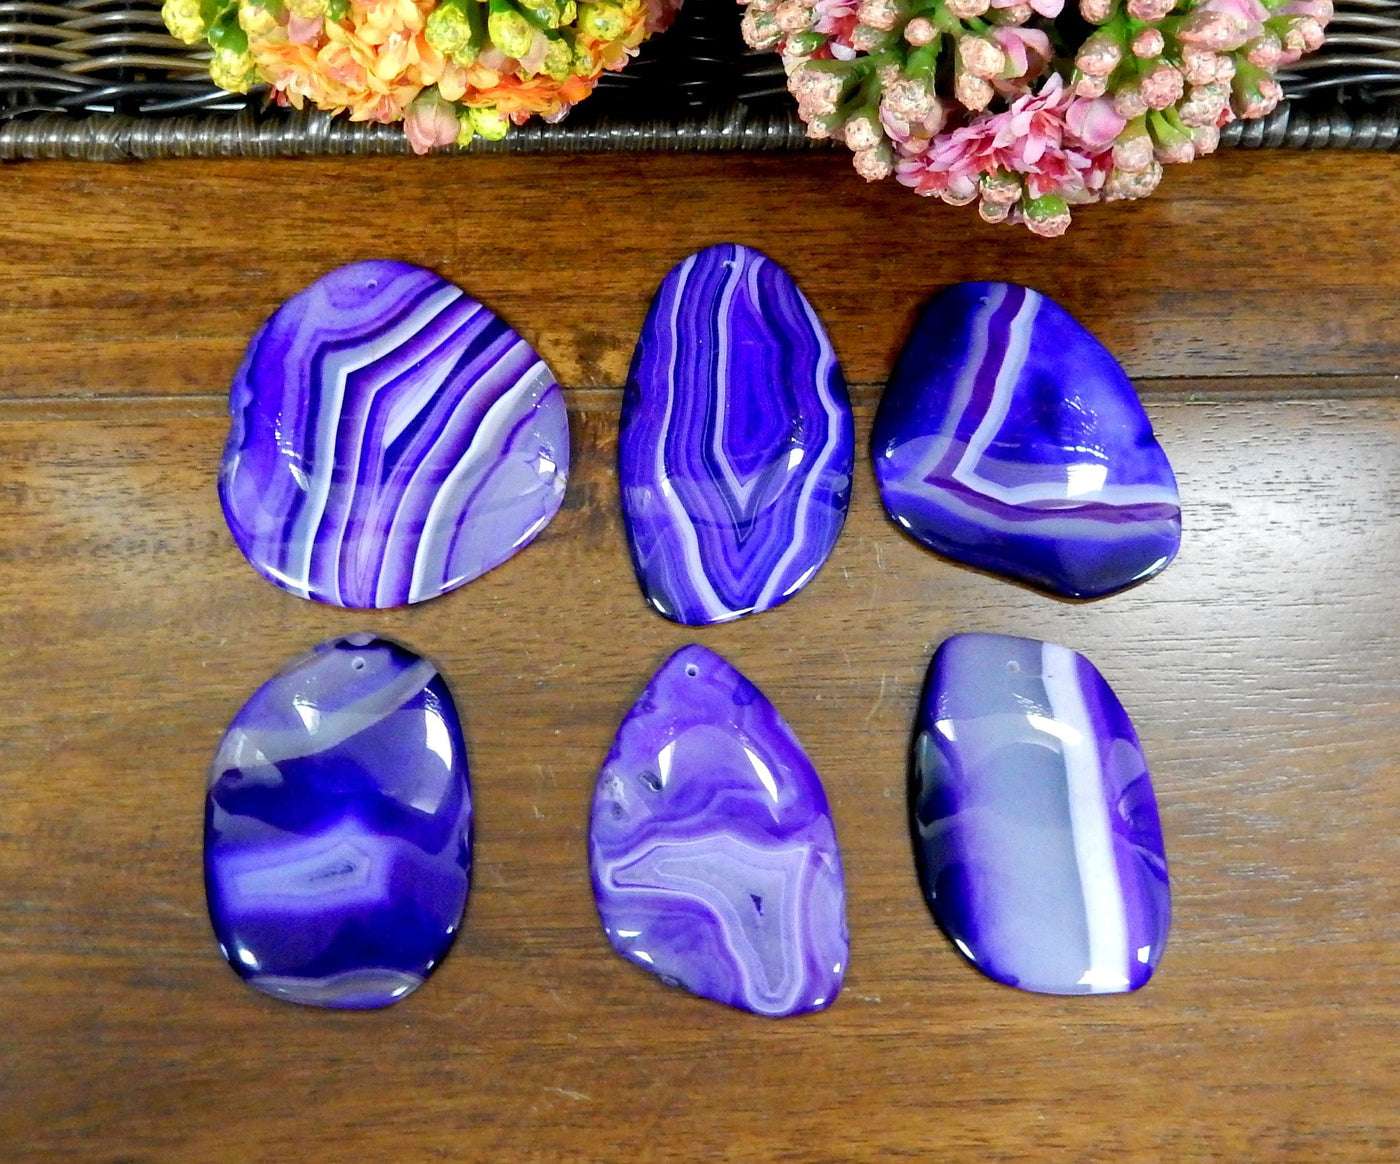 6 Purple FreeForm Agate Slices with Polished Edge on Wooden Background.